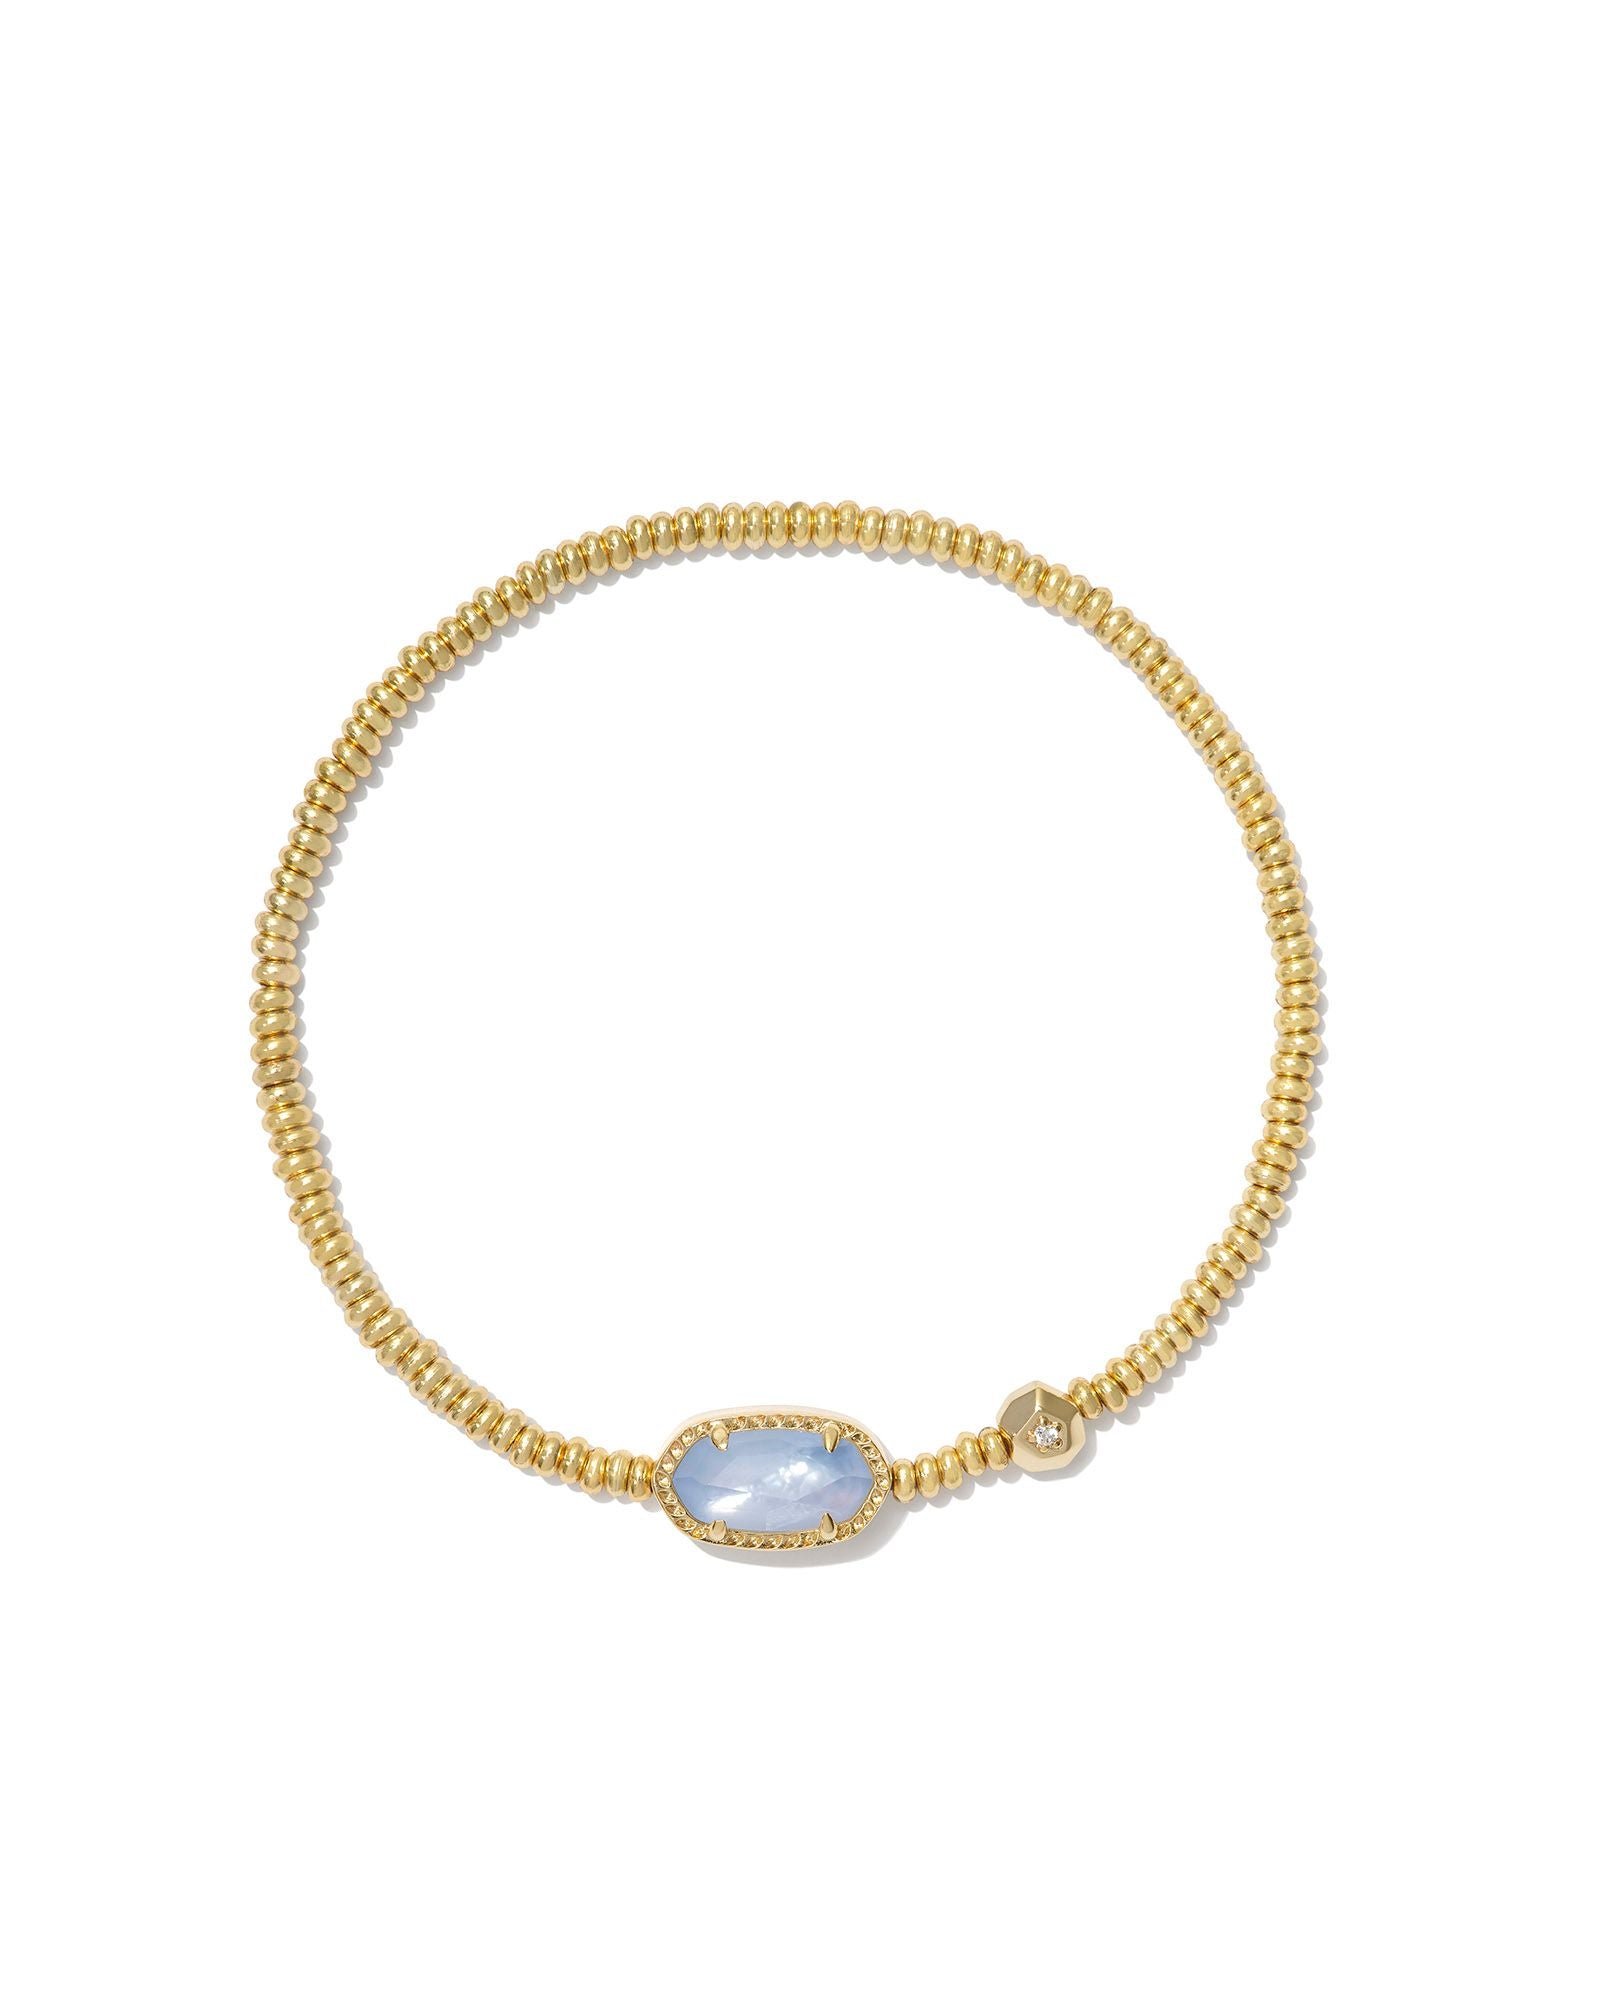 Grayson Stretch Bracelet in Gold Periwinkle Illusion